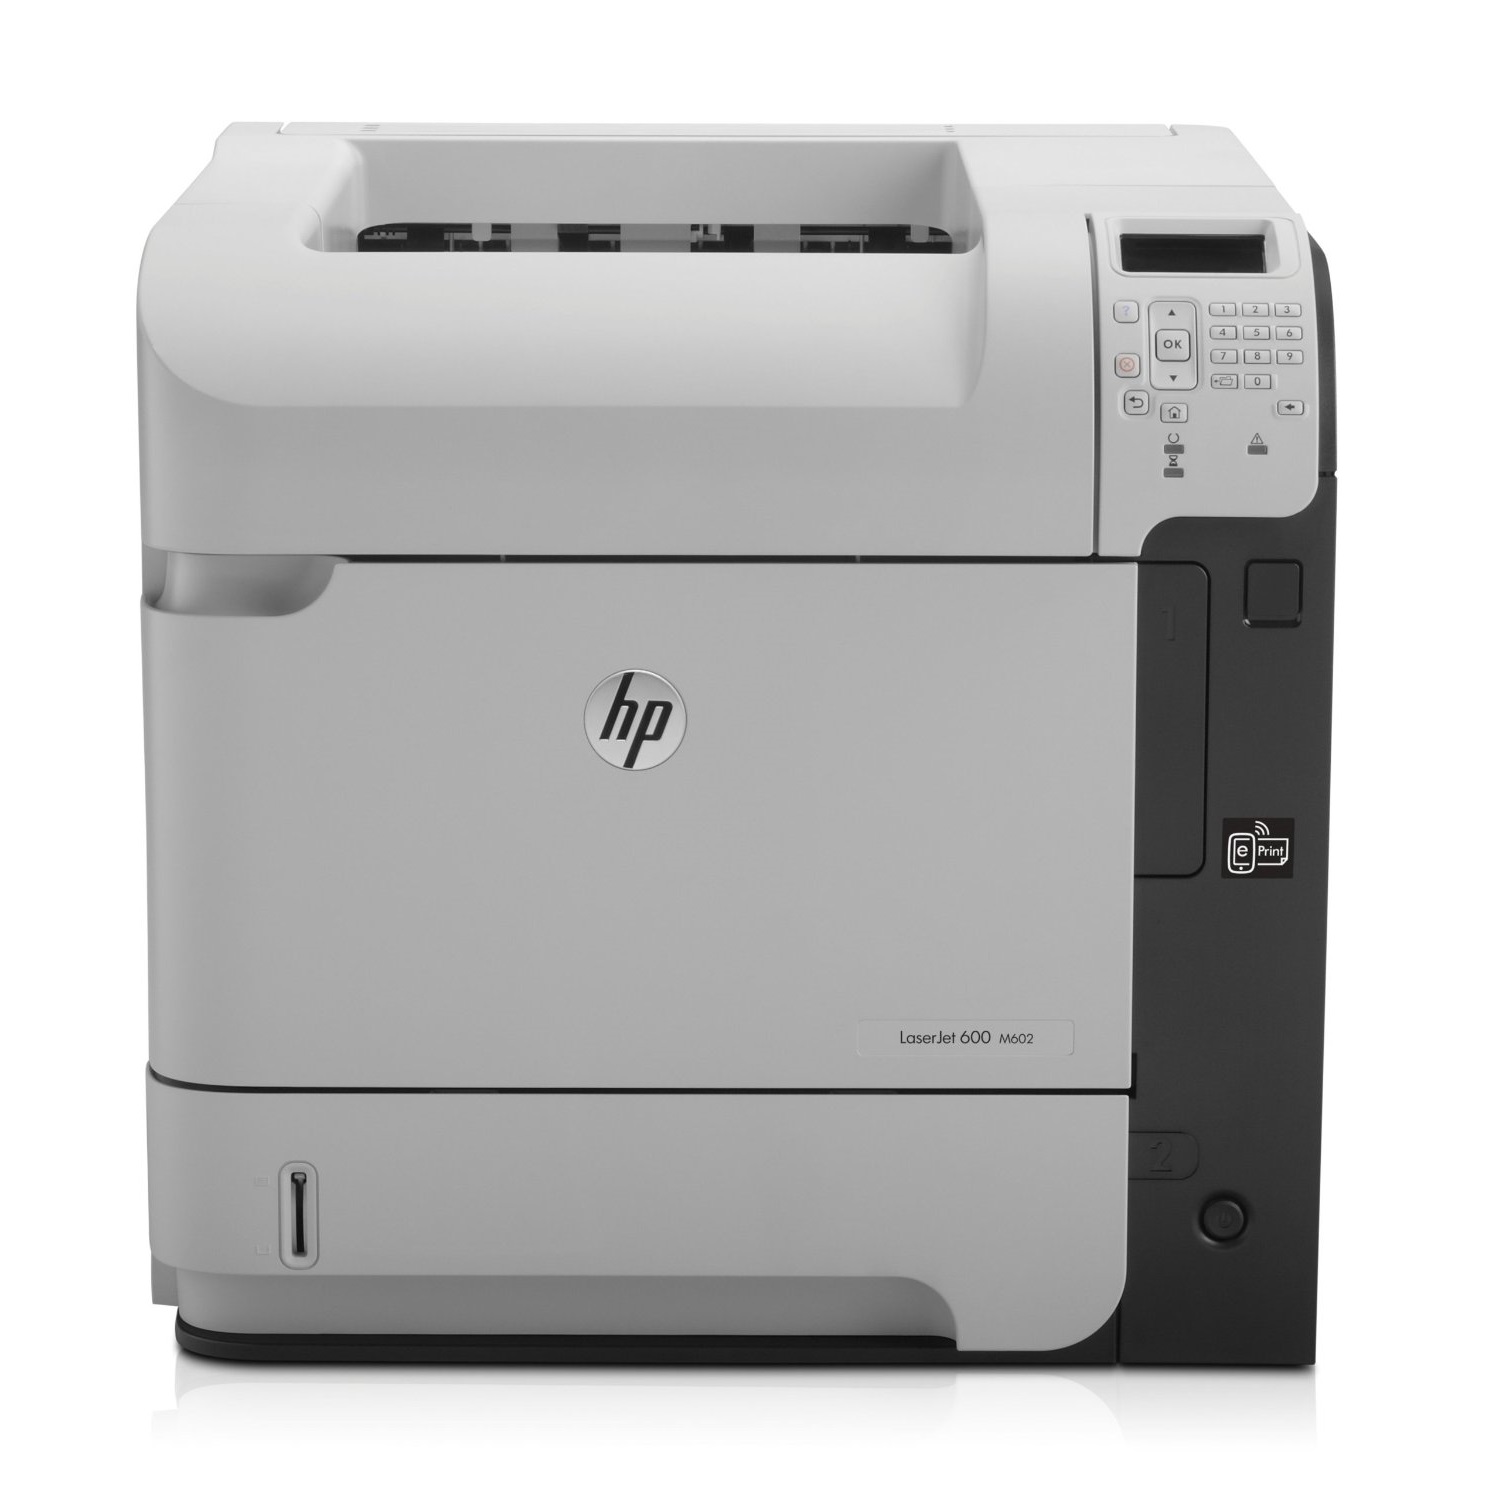 Máy in laser HP Ent 600 M602N-CE991A ( in mạng)